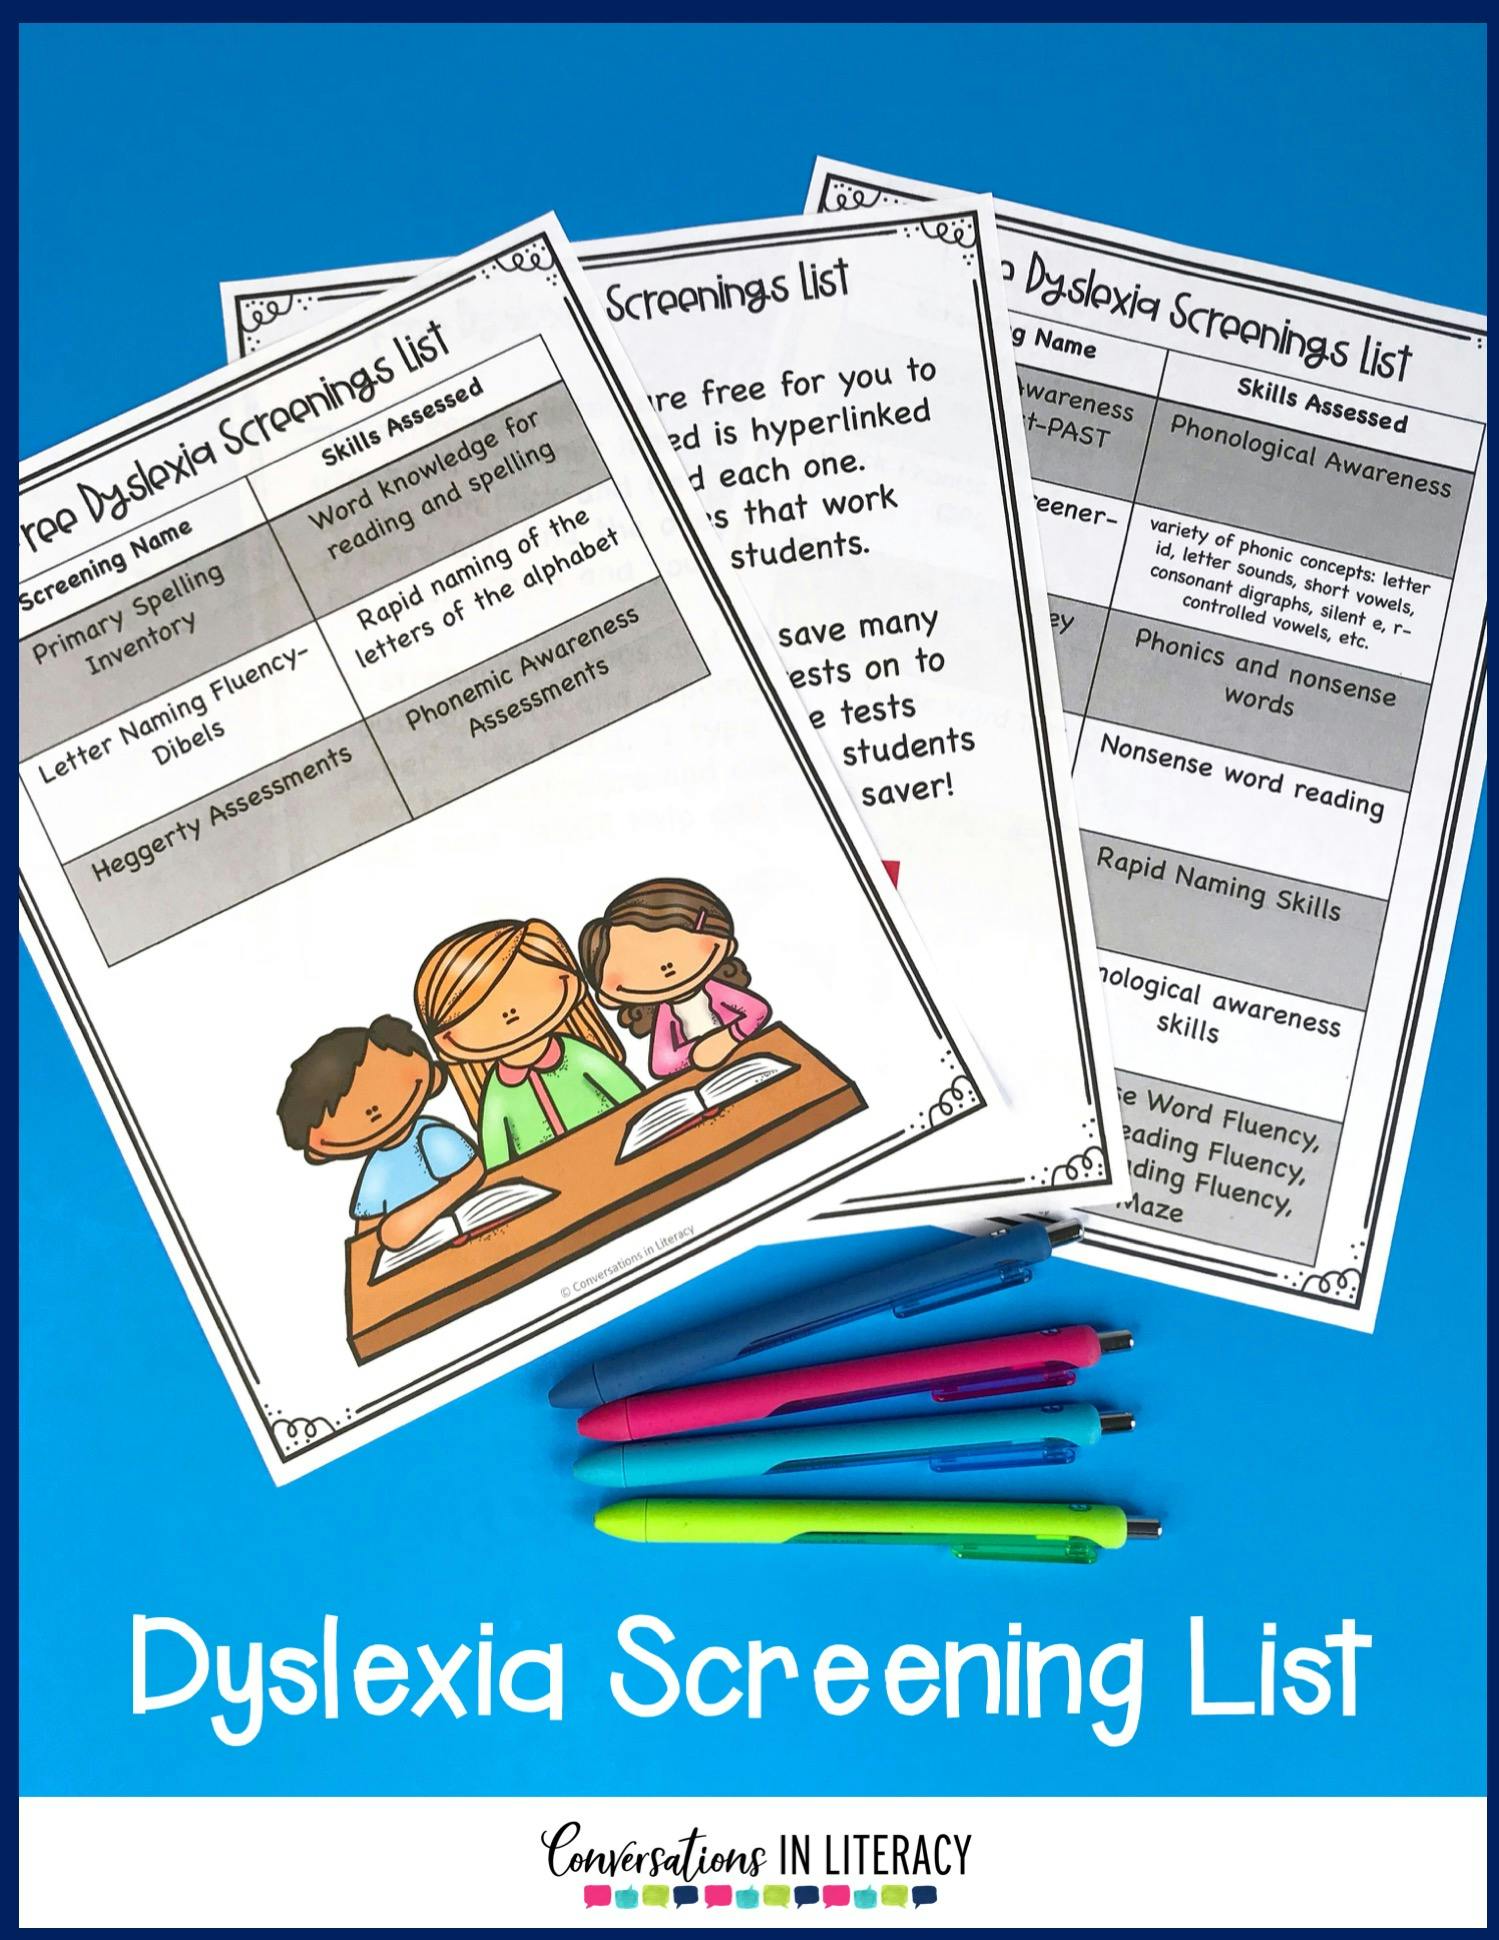 making-the-classroom-dyslexia-friendly-scoonews